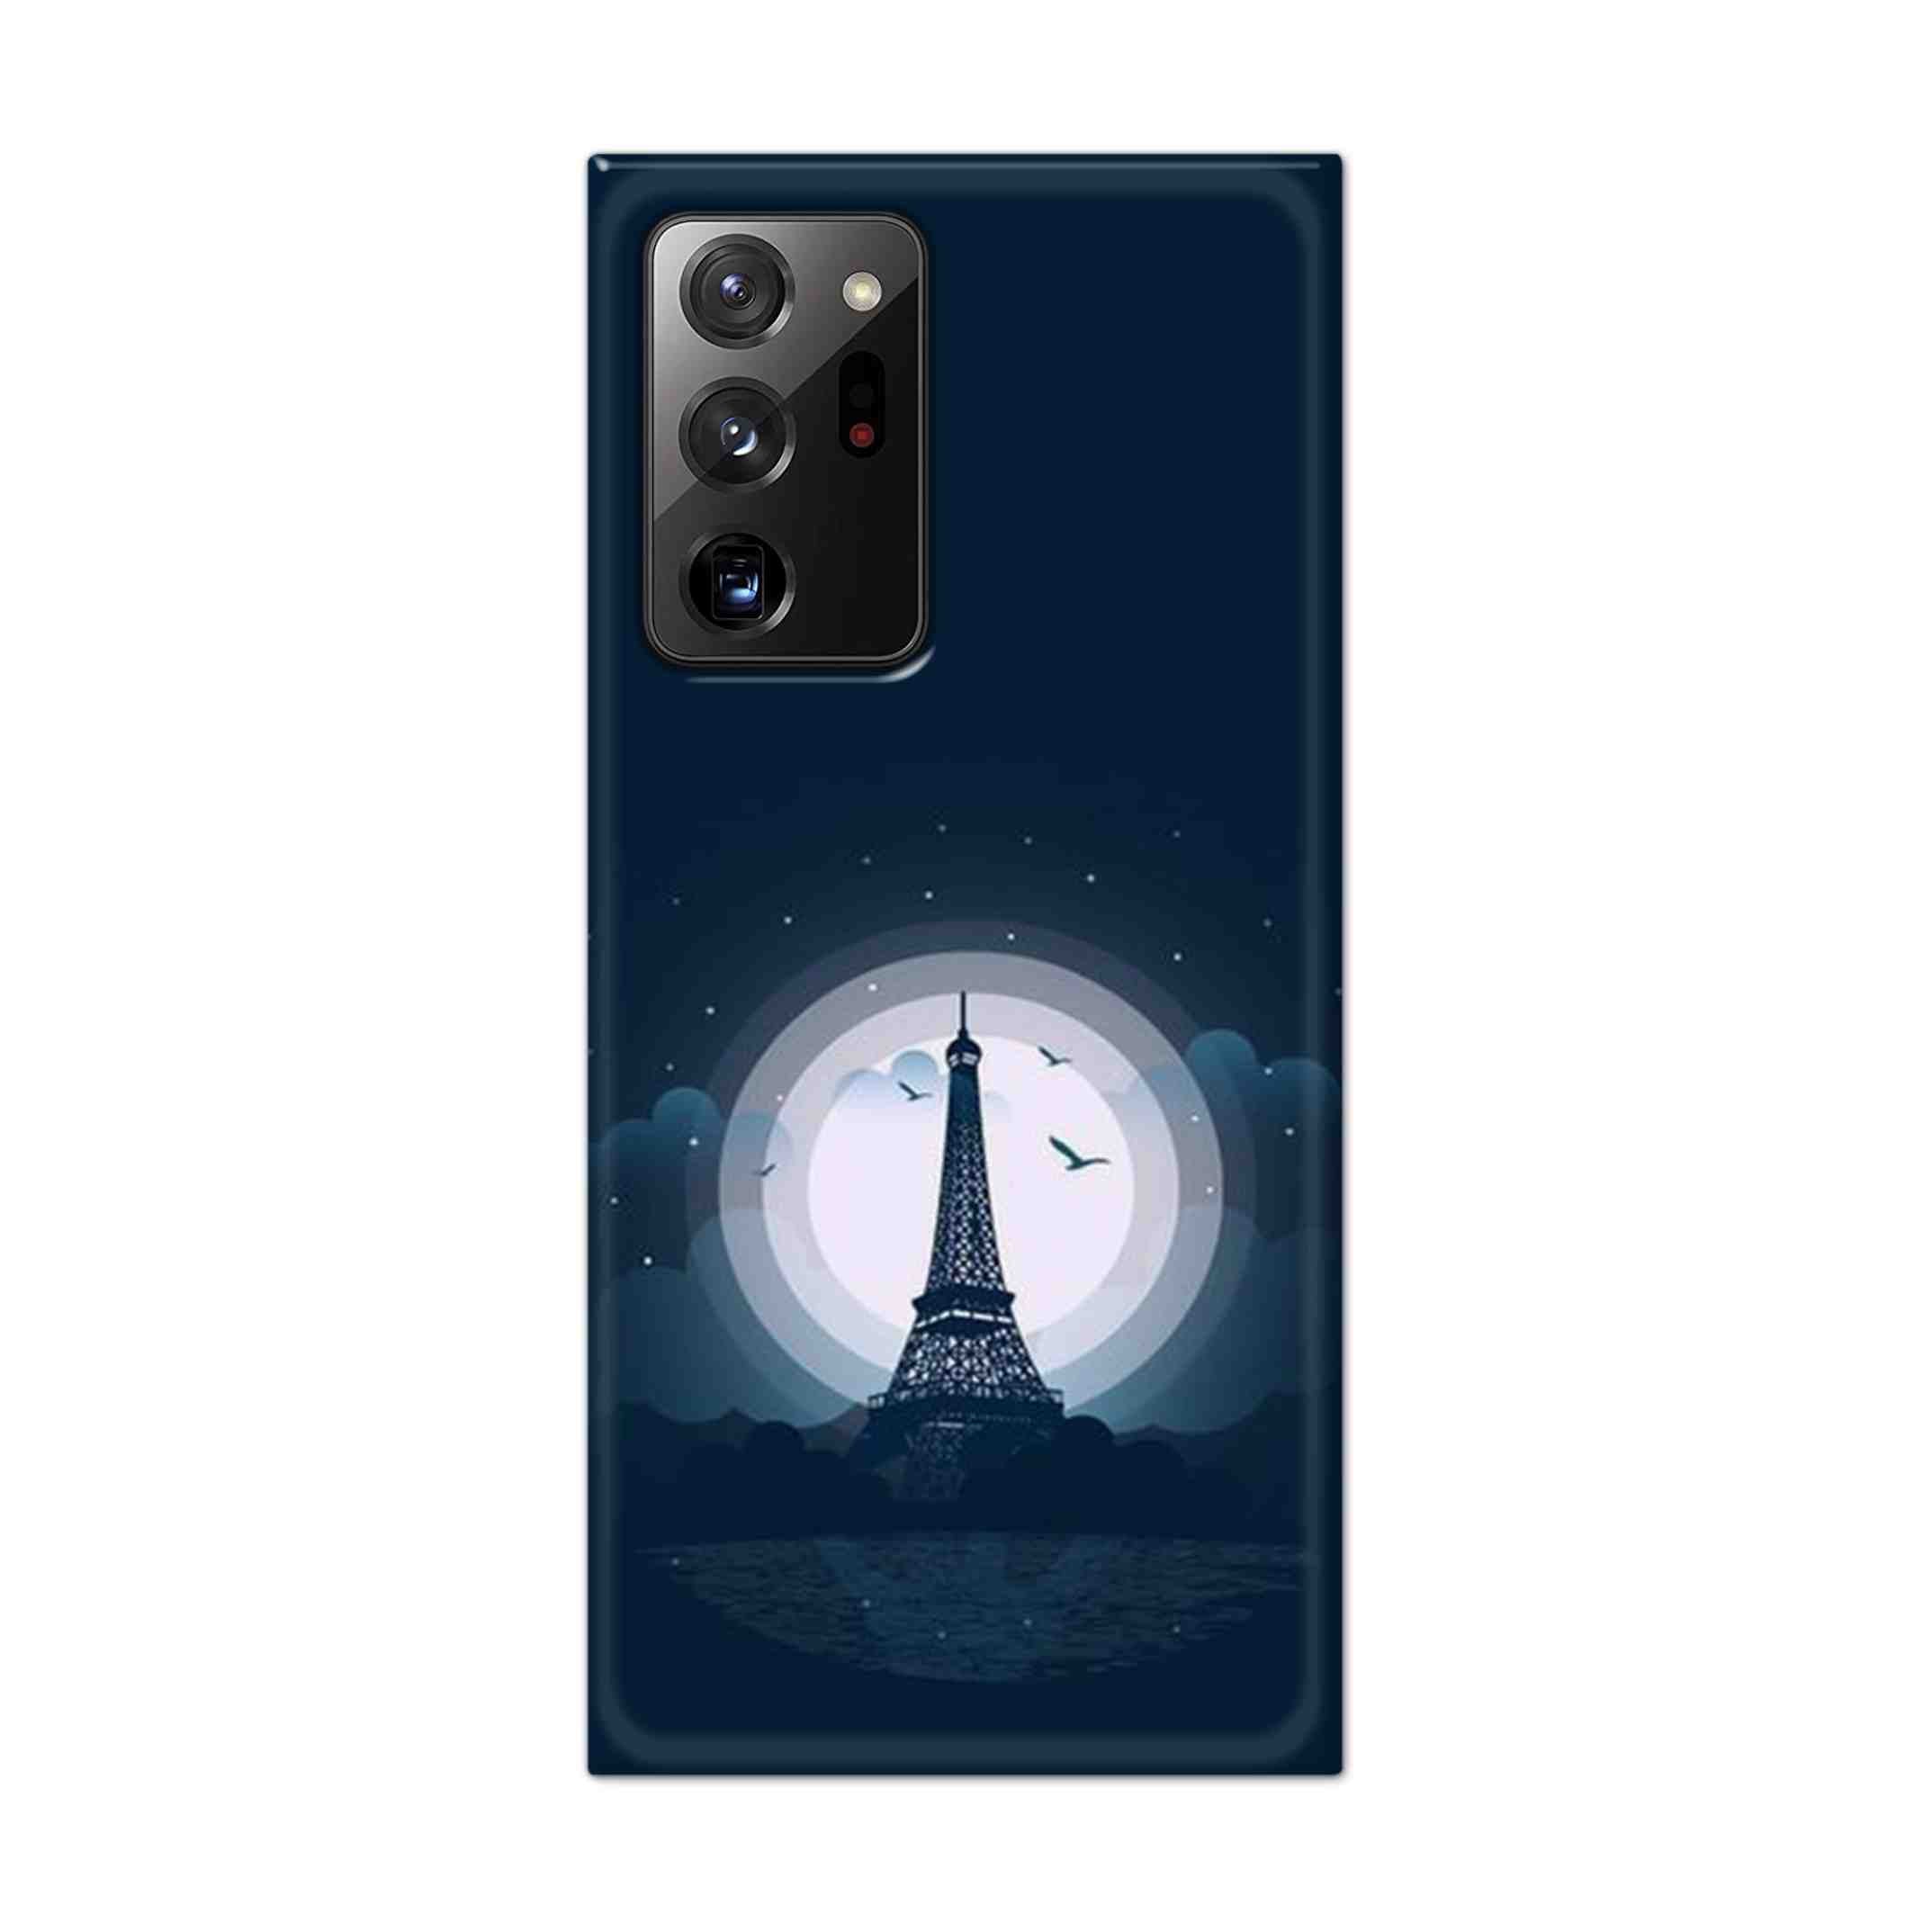 Buy Paris Eiffel Tower Hard Back Mobile Phone Case Cover For Samsung Galaxy Note 20 Ultra Online